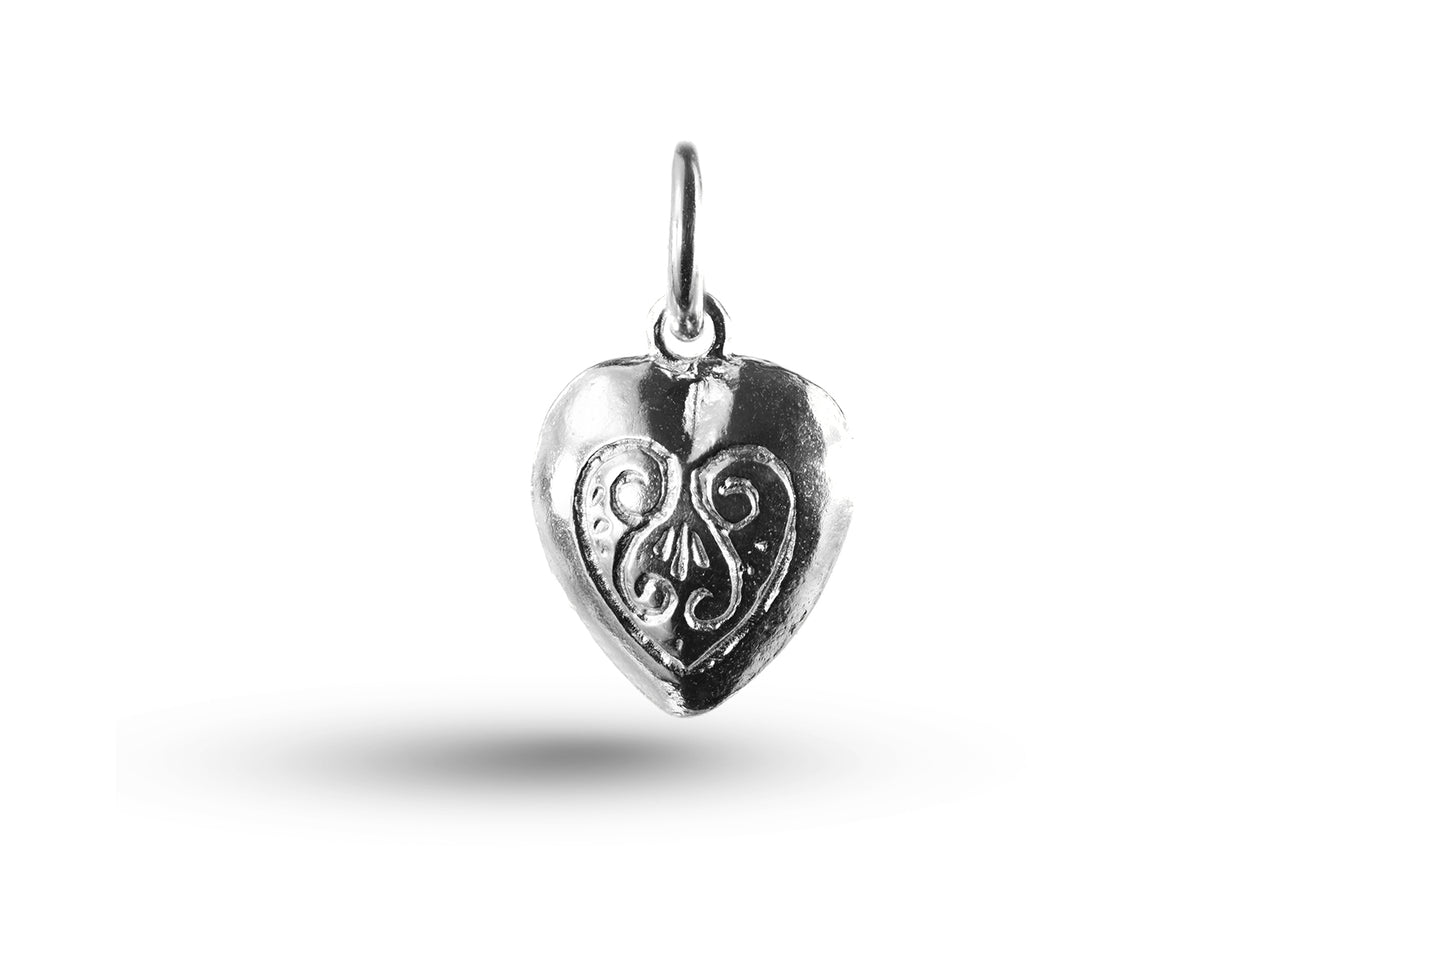 White gold Patterned Heart charm.